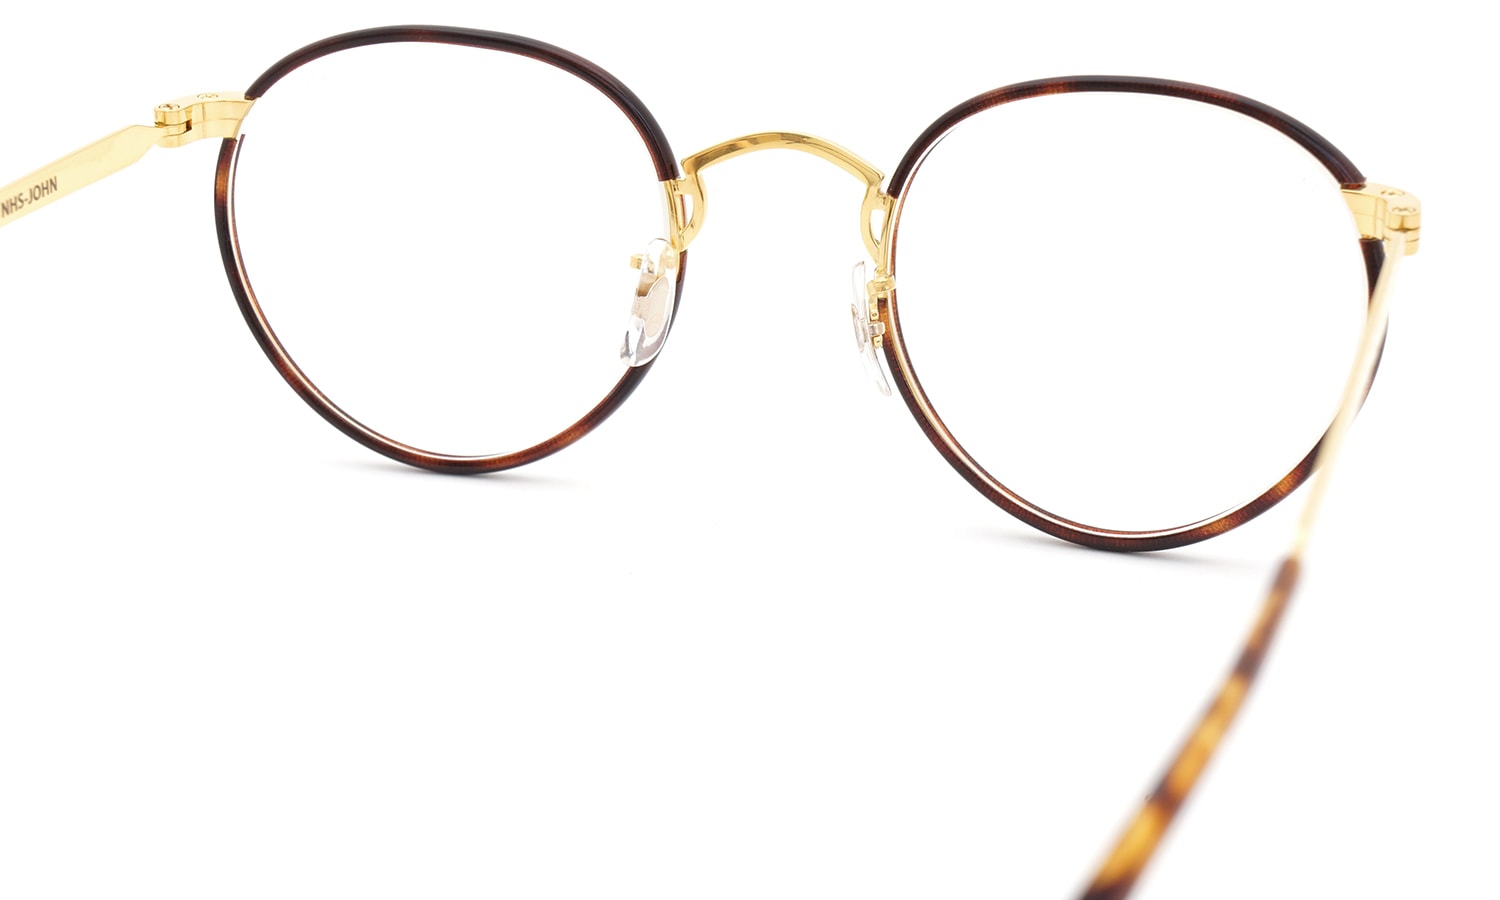 BUNNEY OPTICALS by OLIVER PEOPLES NHS-JOHN BROWN